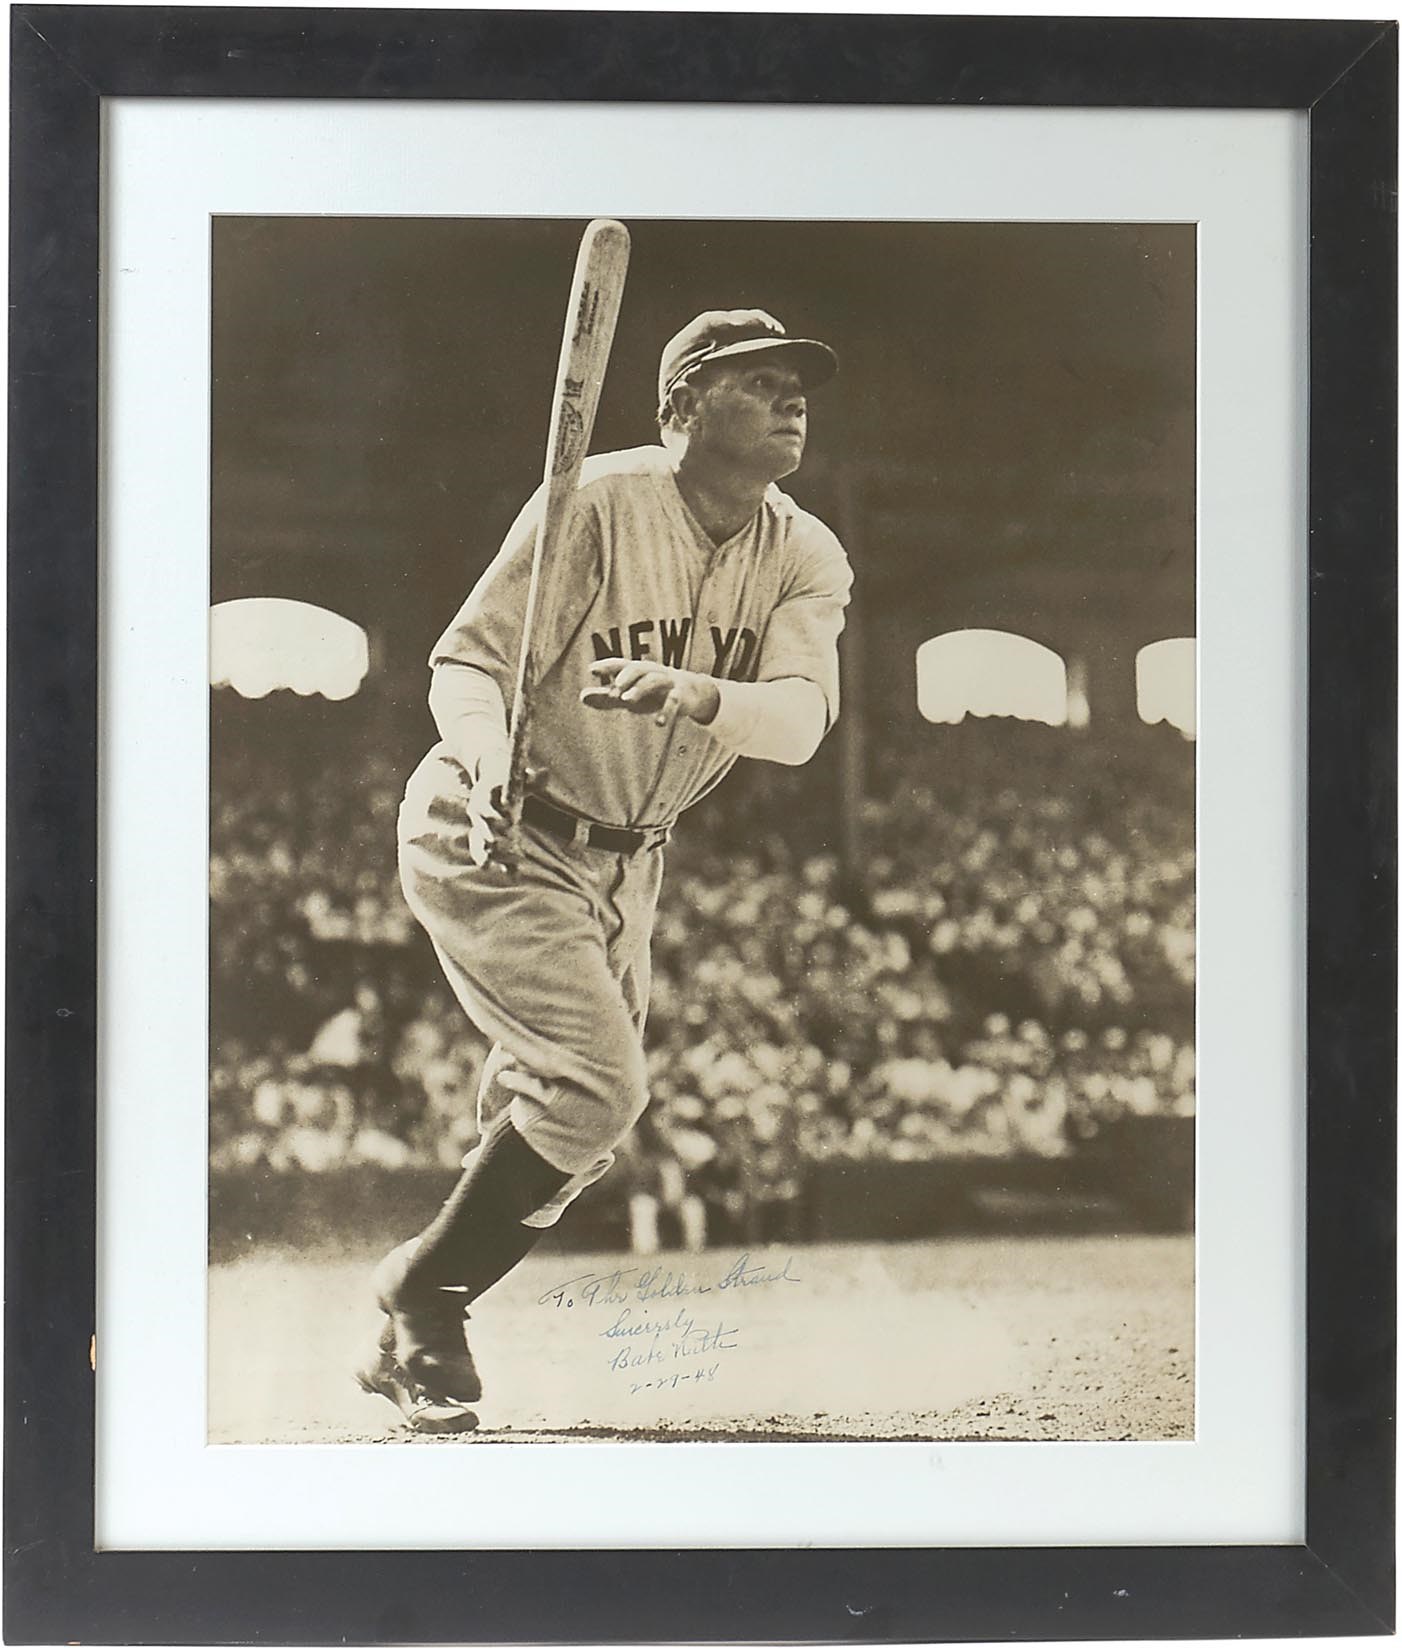 Best of the Best - Mammoth Babe Ruth "Golden Strand" Signed Photograph